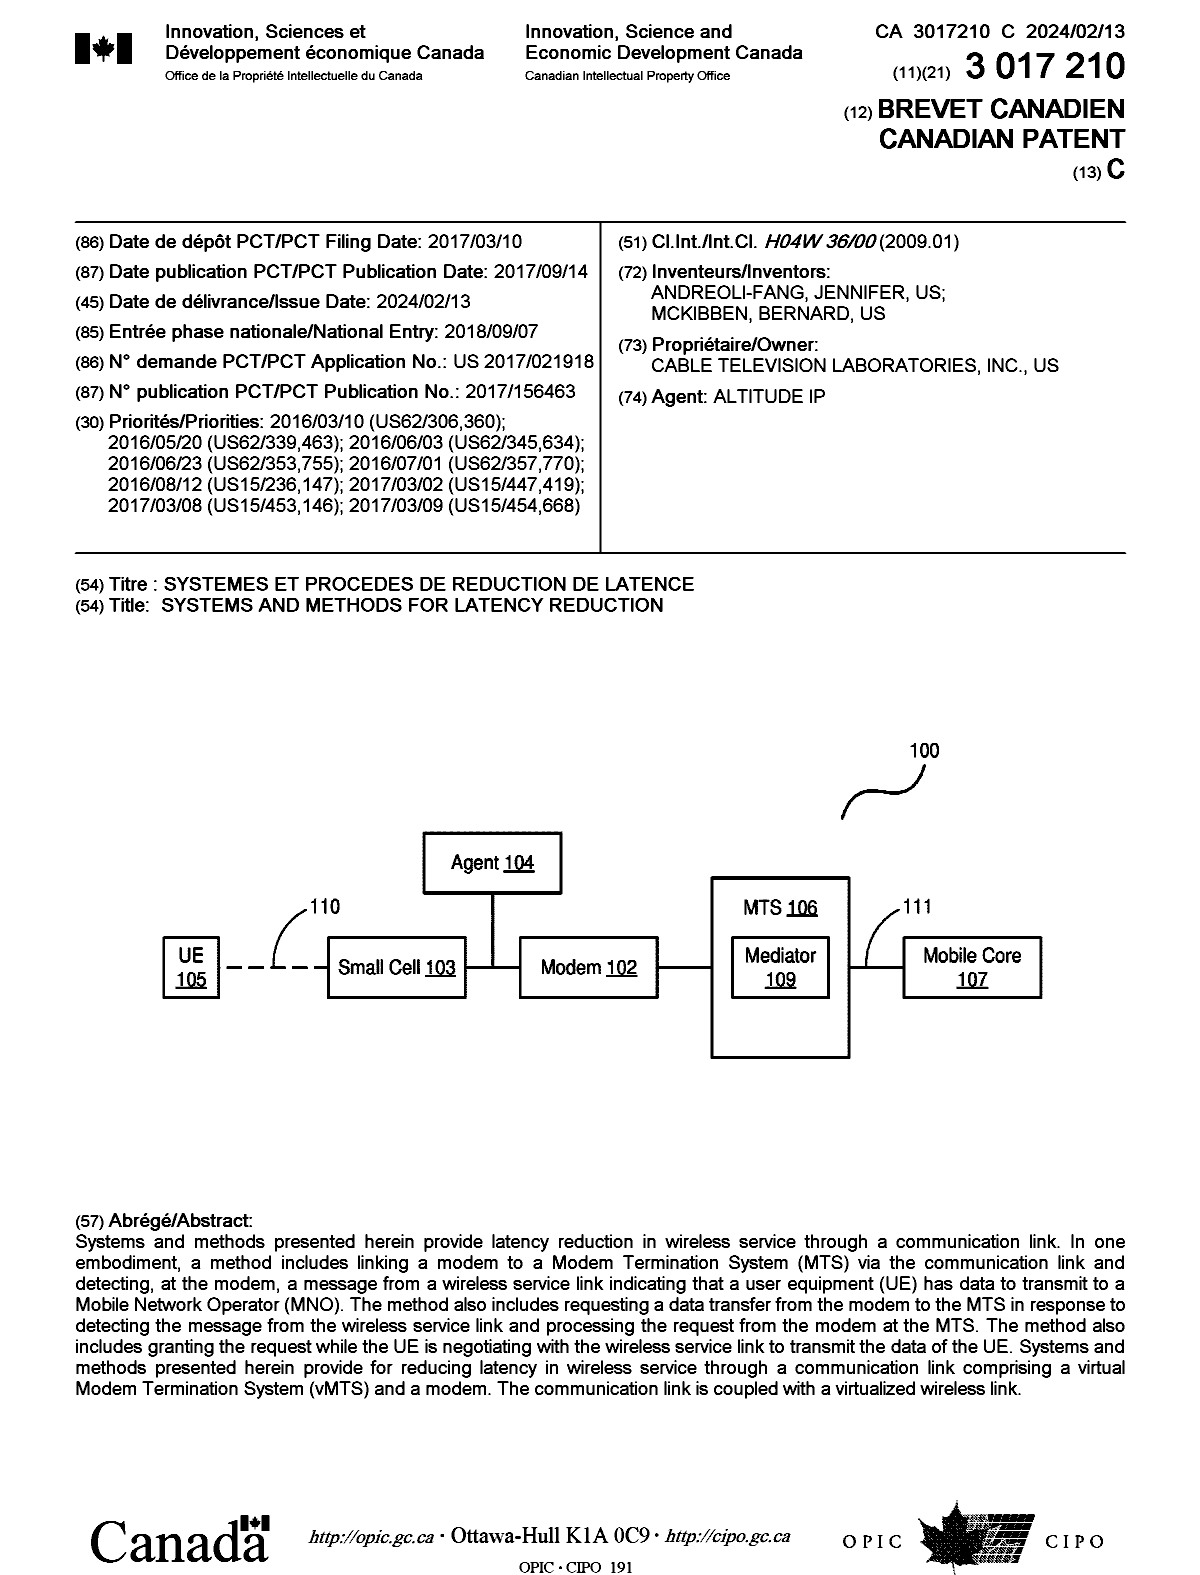 Canadian Patent Document 3017210. Cover Page 20240116. Image 1 of 1